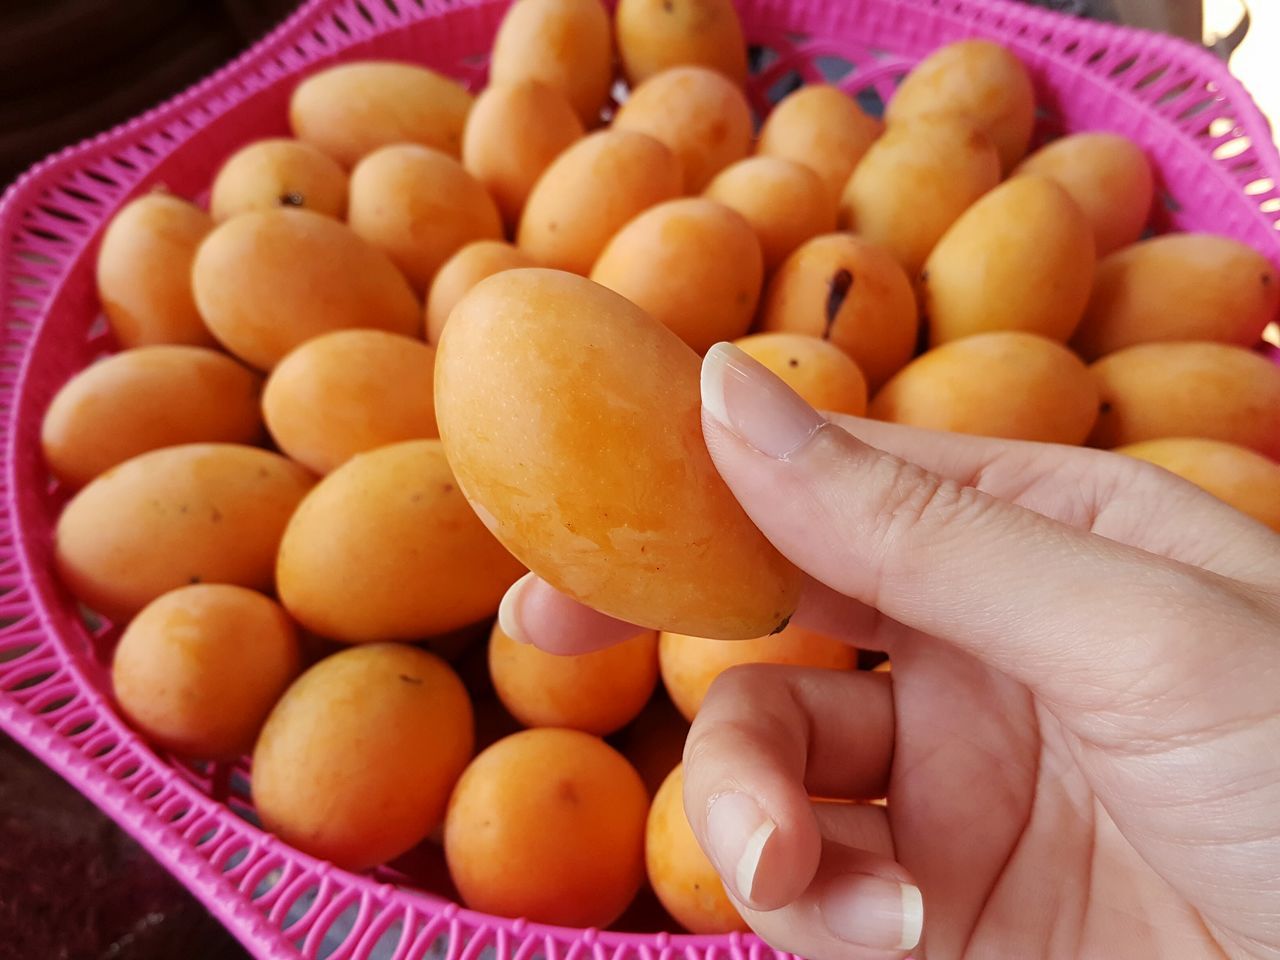 CLOSE-UP OF HAND HOLDING FRUIT